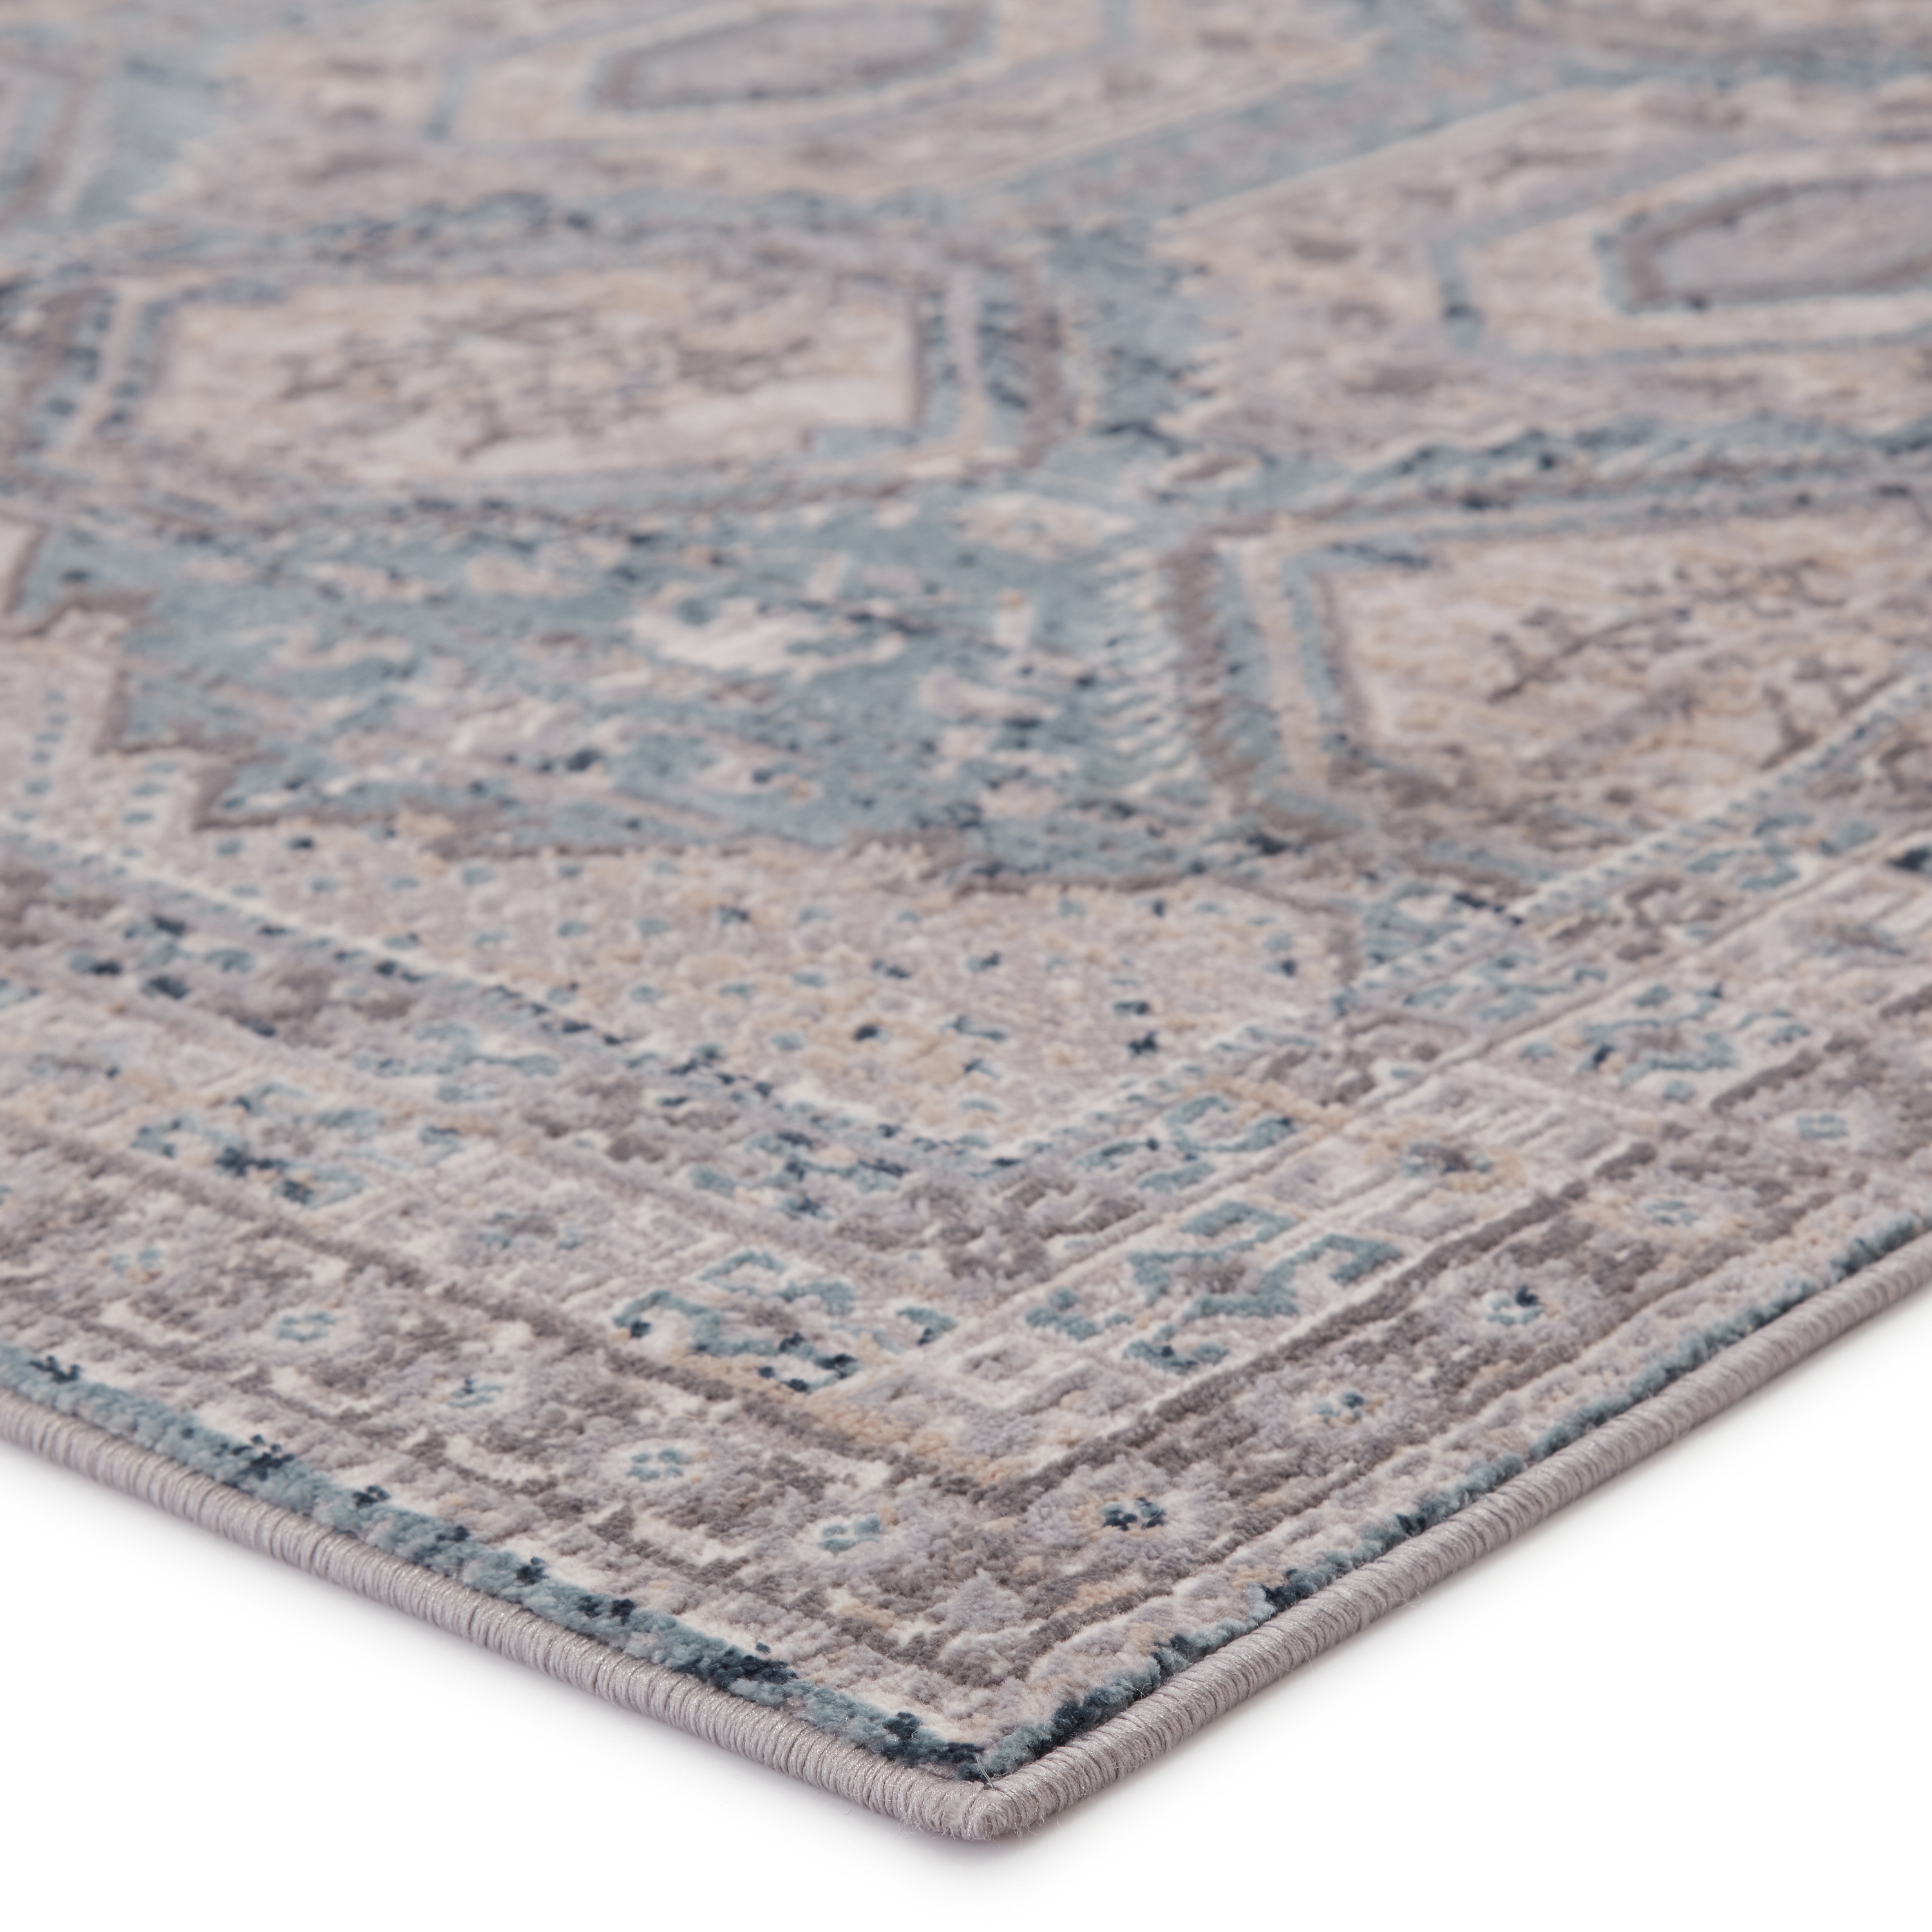 Vibe by Cabazon Trellis Gray/ Blue Area Rug (9'X13') - Image 1